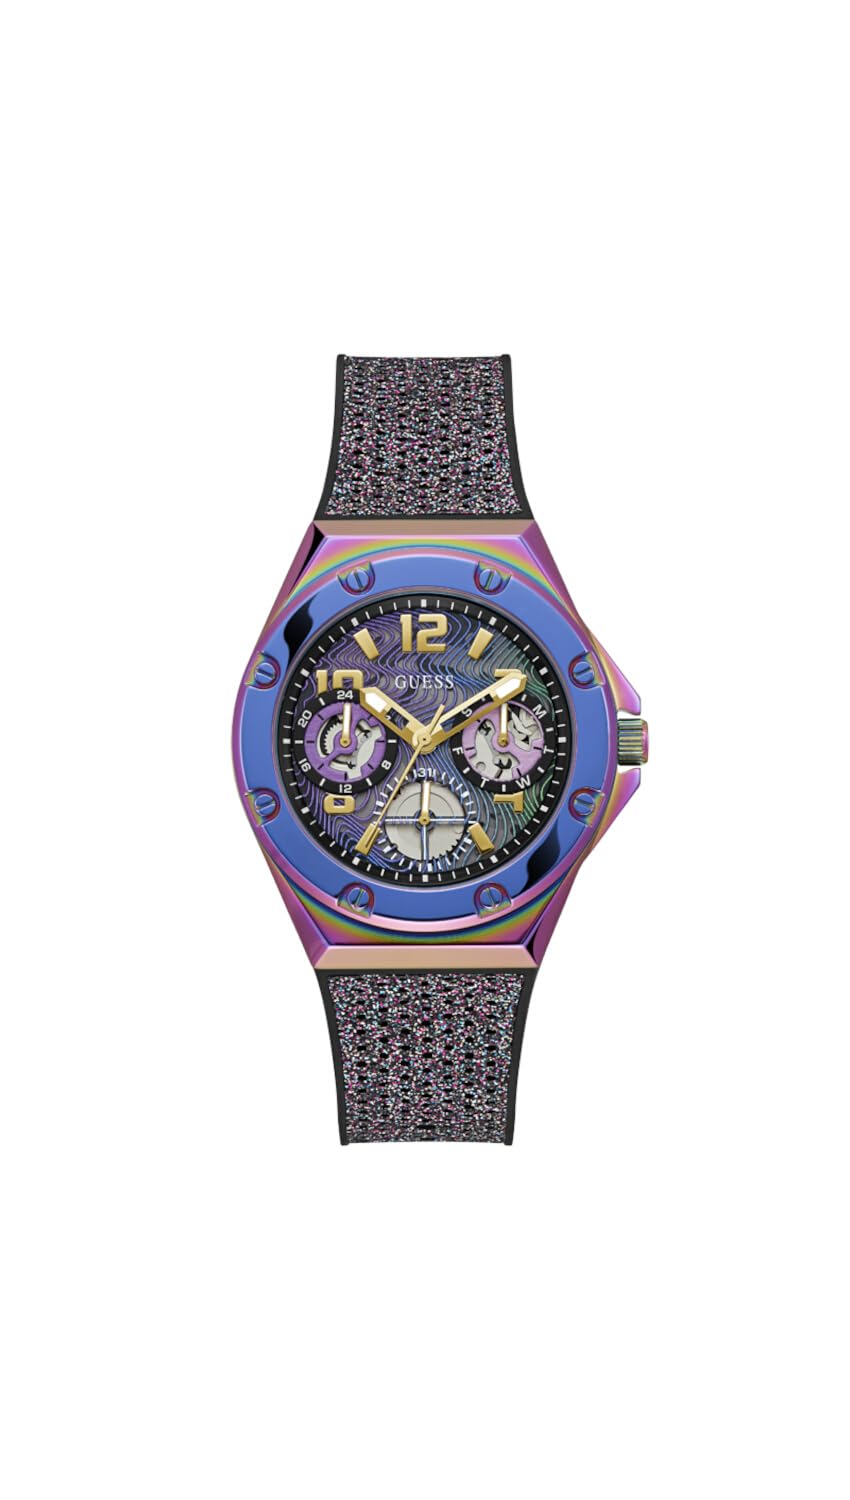 GUESS Women's 40mm Watch - Multi-Color Strap Multi Dial Iridescent Case